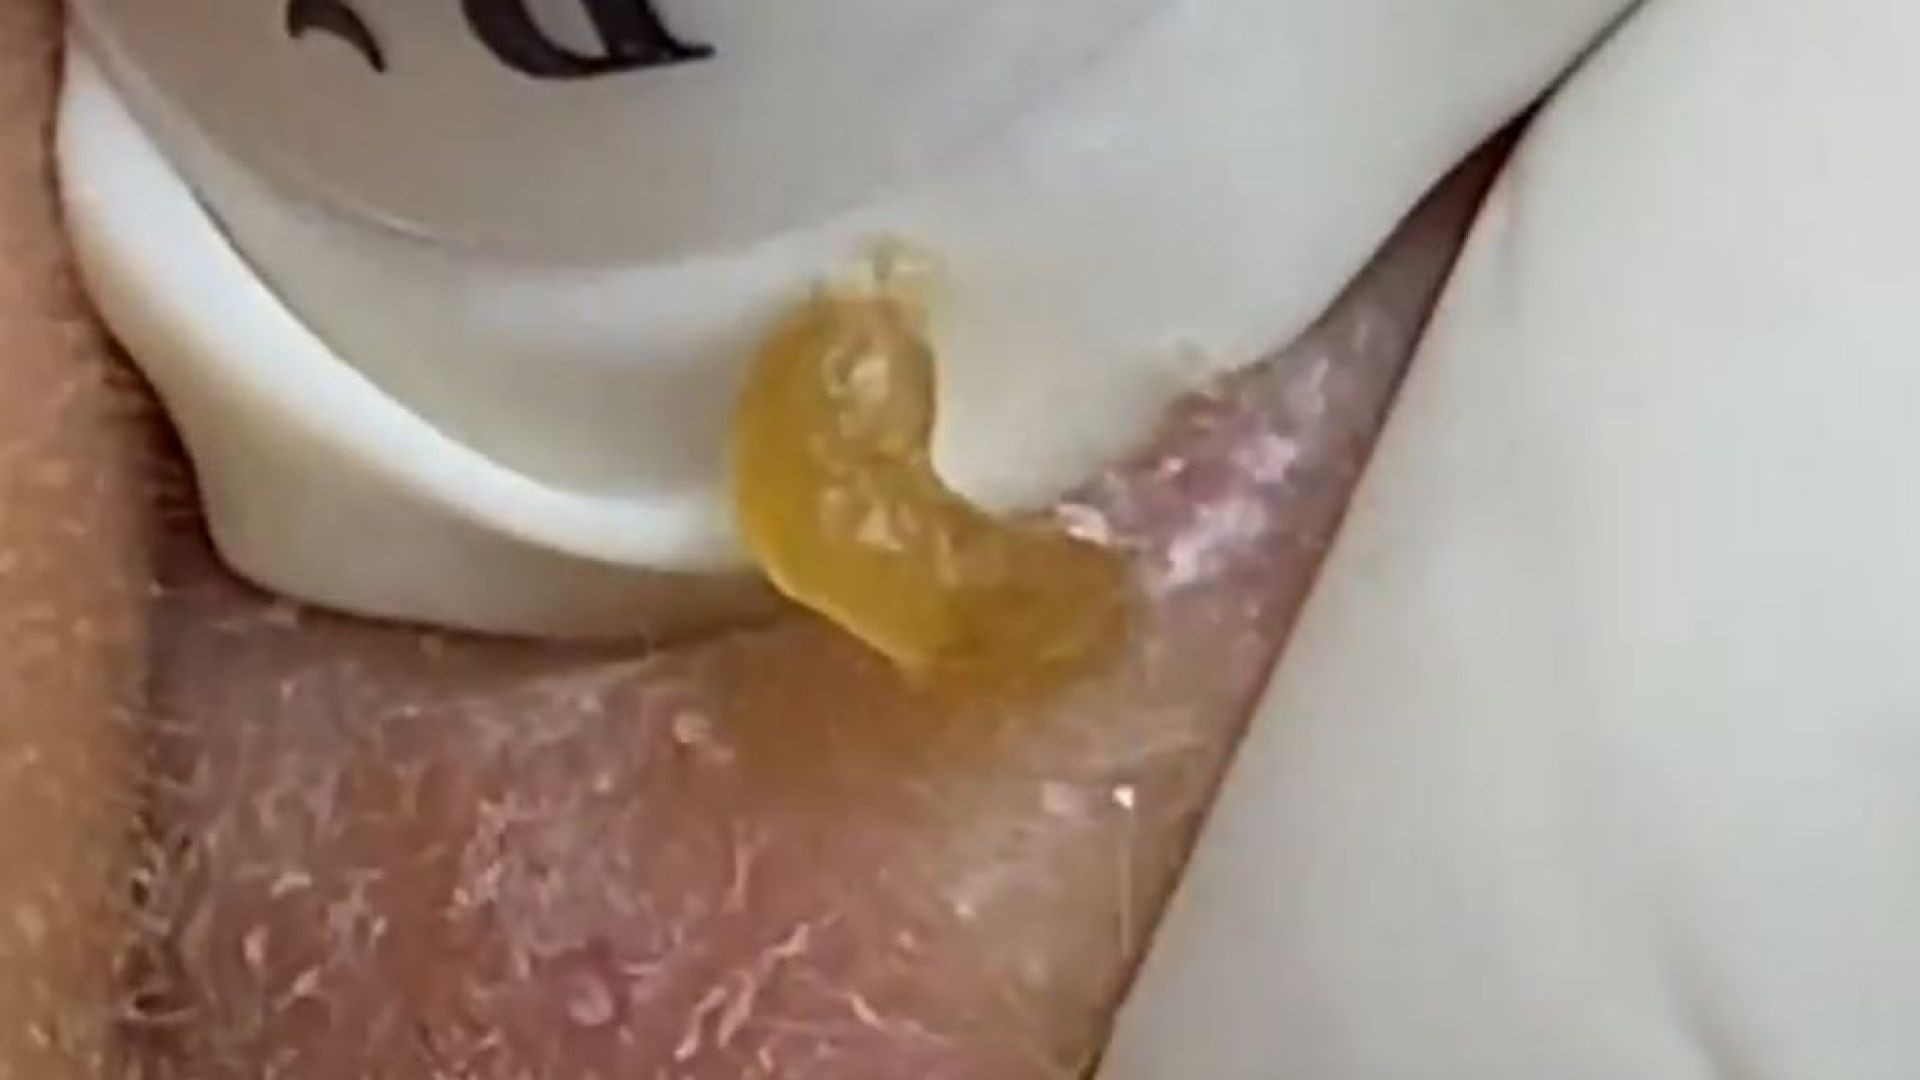 Extreme Close up of Popping Giant Blackheads